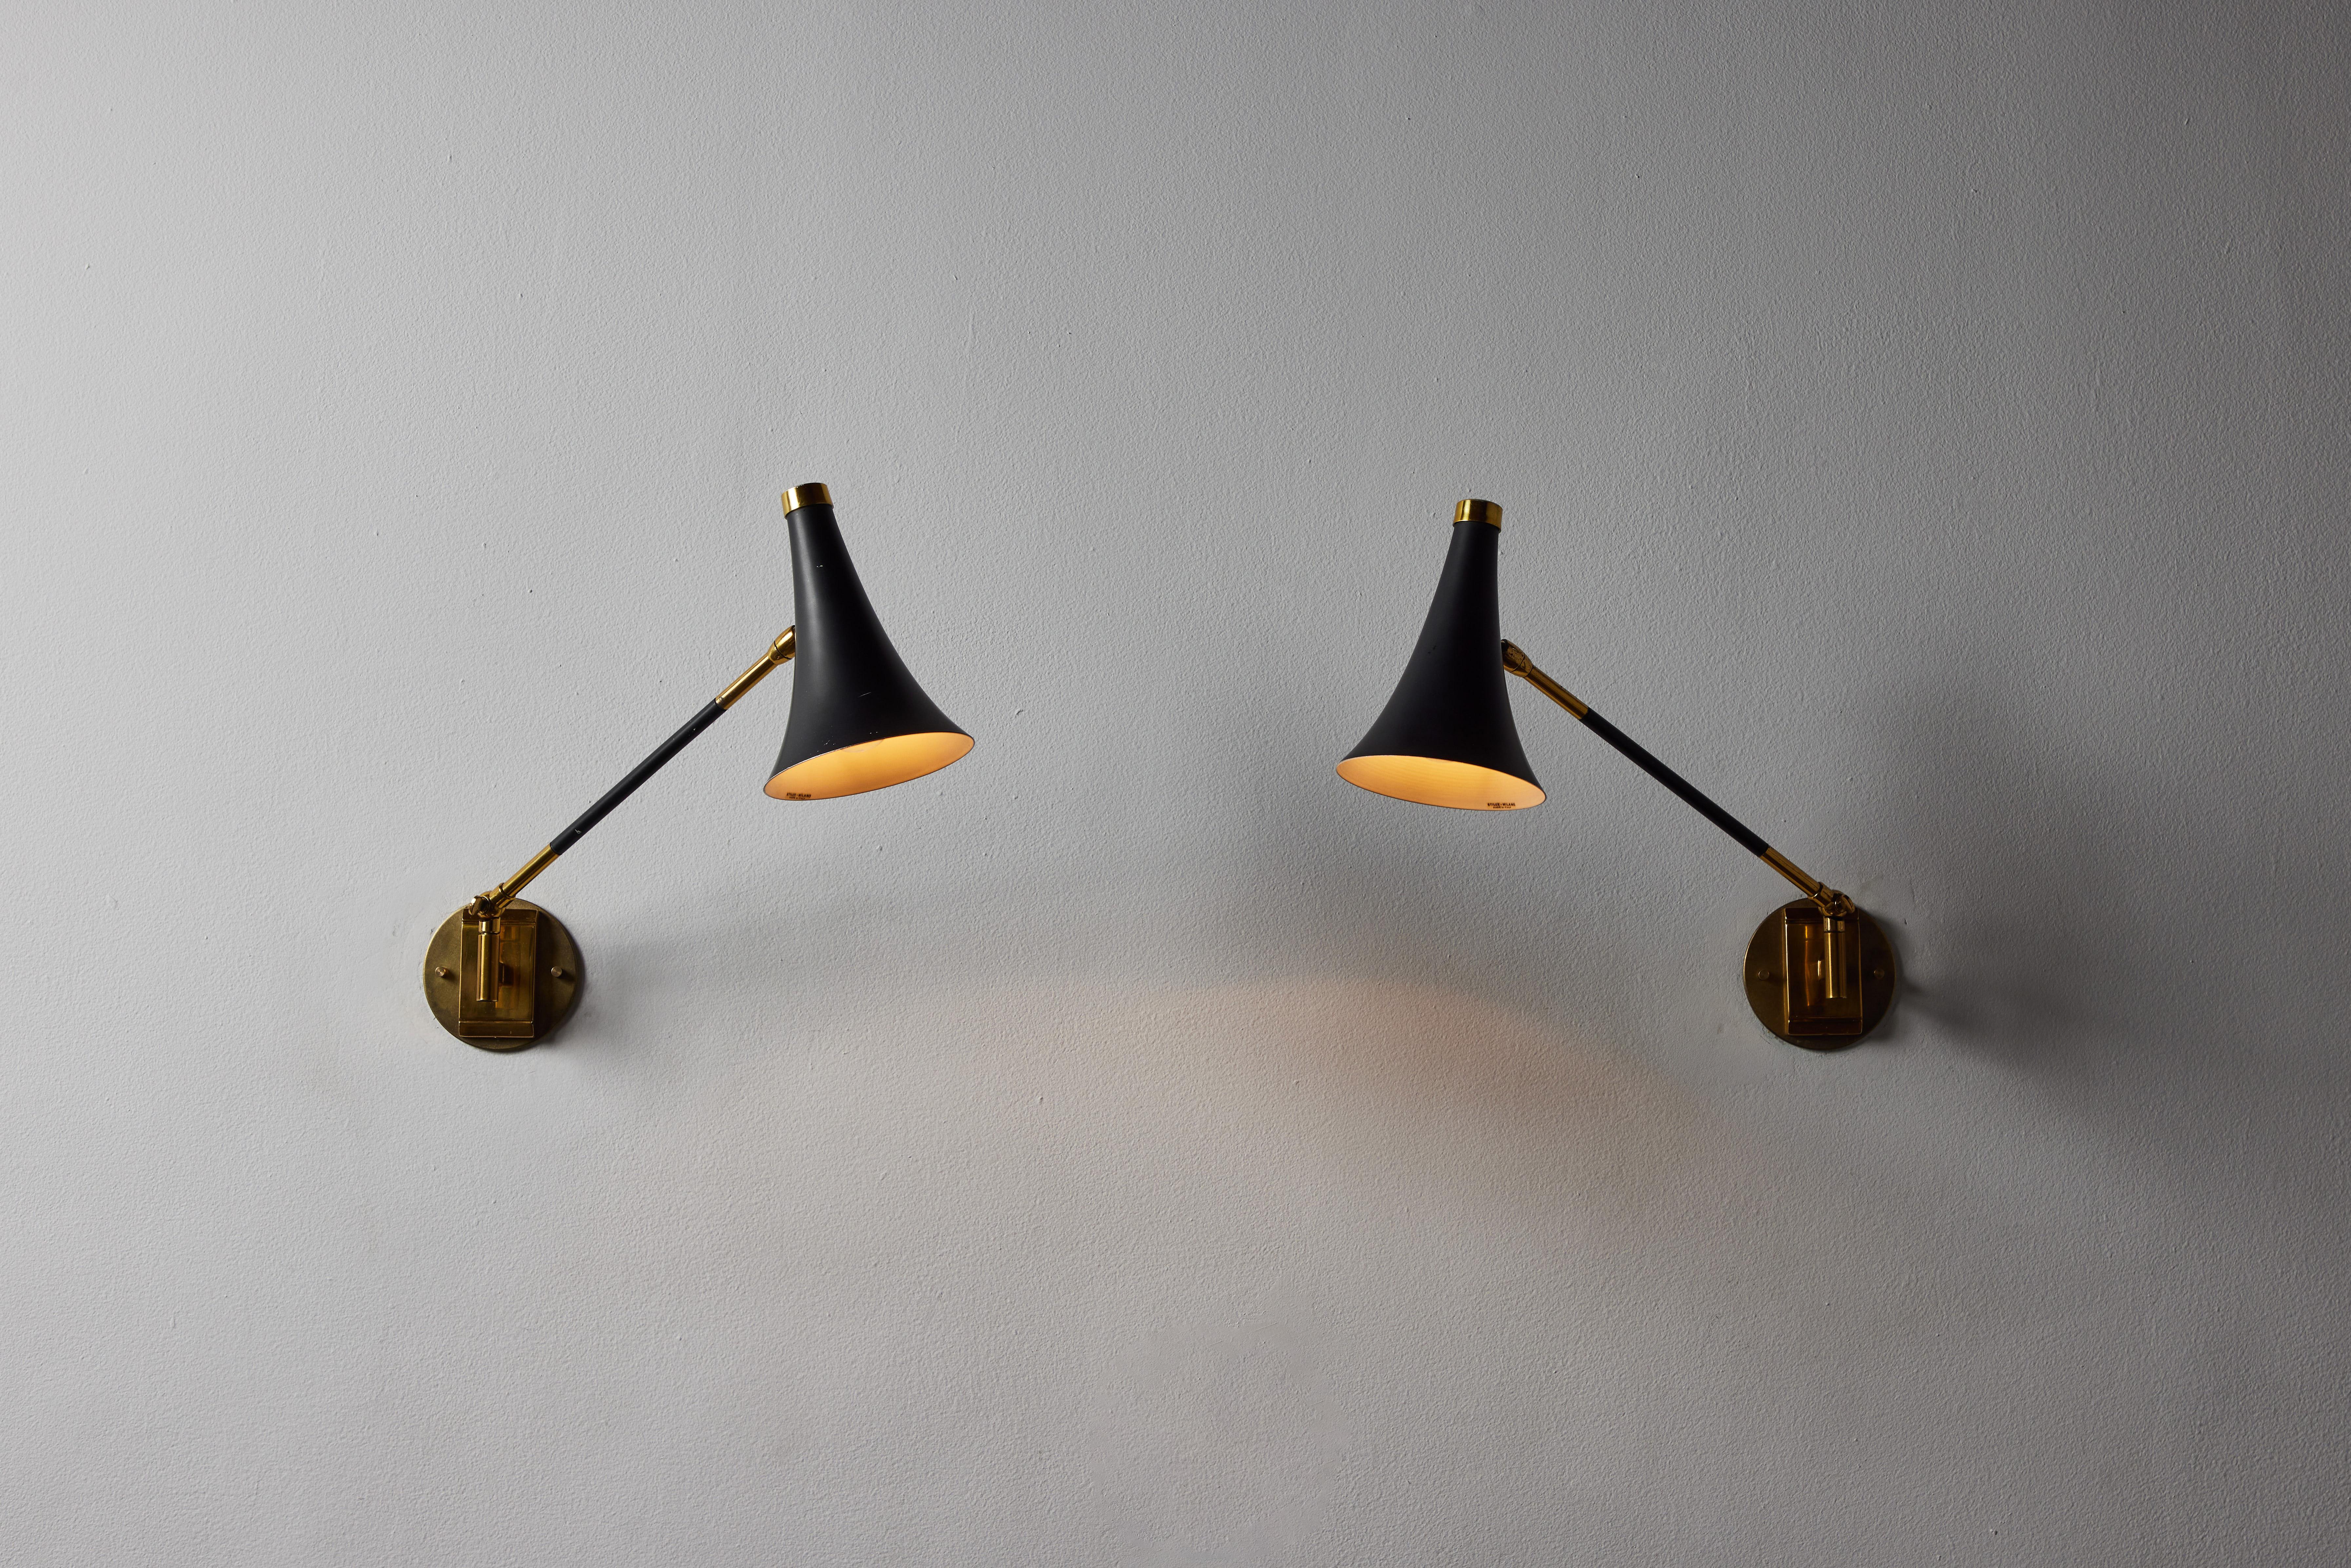 Two wall lights by Stilux. Manufactured in Italy, circa 1950s. Enameled metal, brass. Custom brass backplate. Wired for U.S. standards. Shades and arms are adjustable. We recommend one E14 European candelabra per sconce. Bulbs provided as a one time